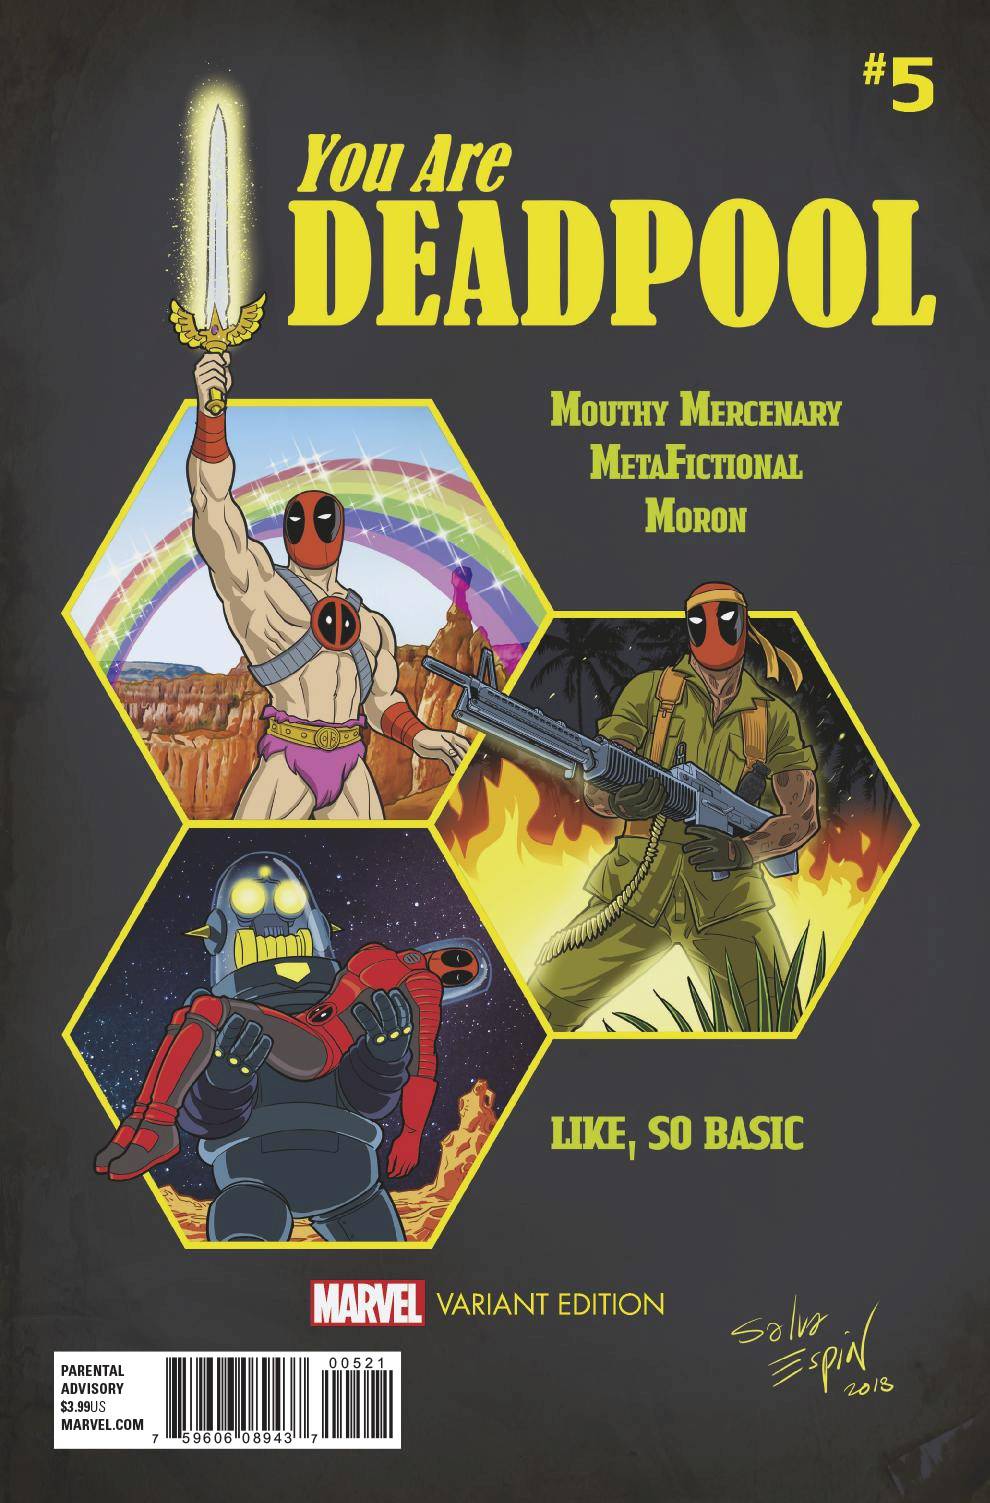 YOU ARE DEADPOOL #5 (OF 5) ESPIN RPG VAR